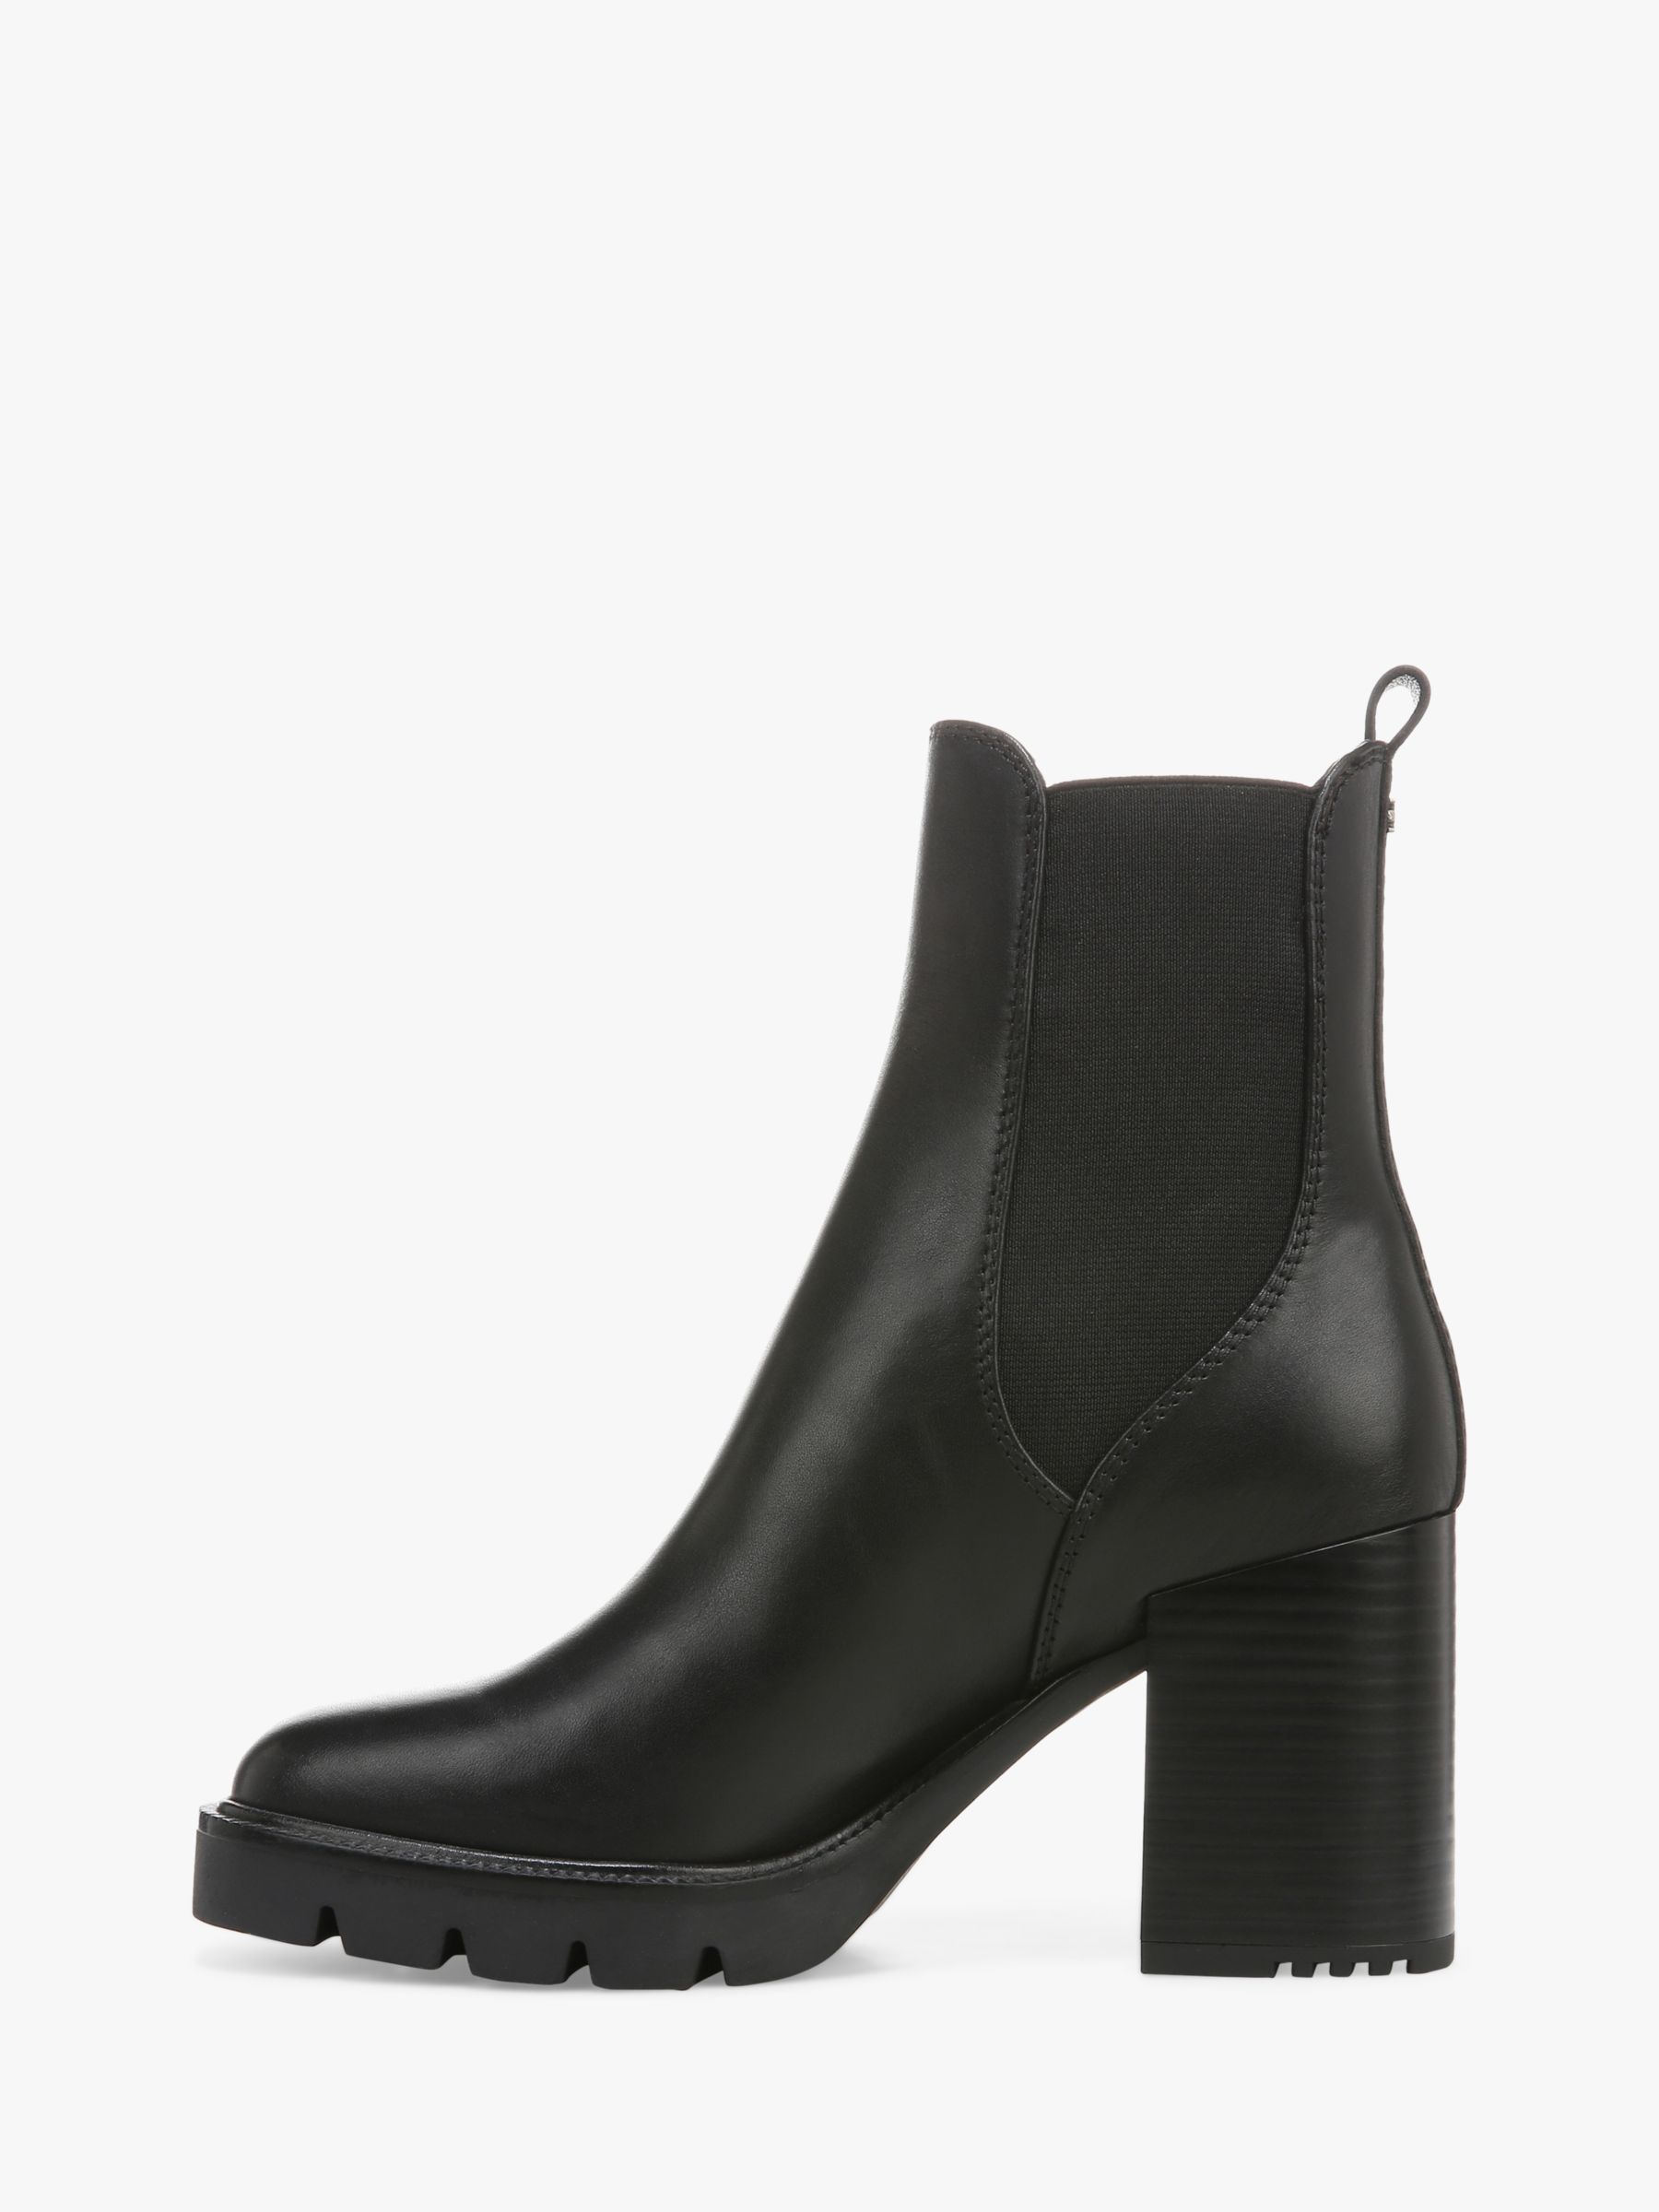 Sam Edelman Rollins Leather Heeled Ankle Boots, Black at John Lewis & Partners